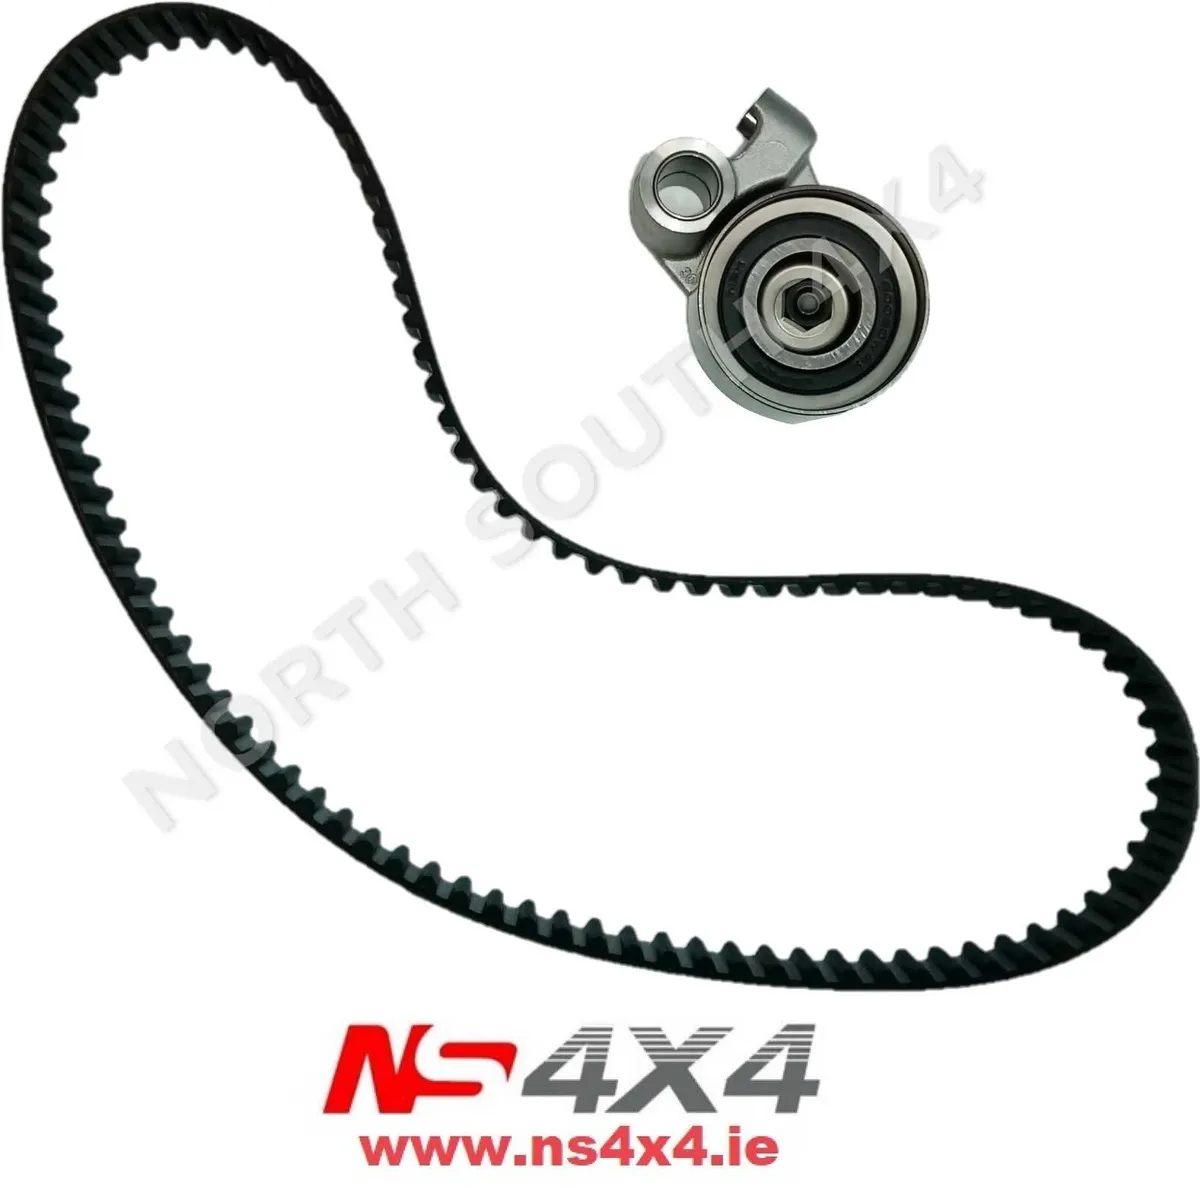 Timing Belt Kit for Toyota Hilux *All Spares* - Image 1